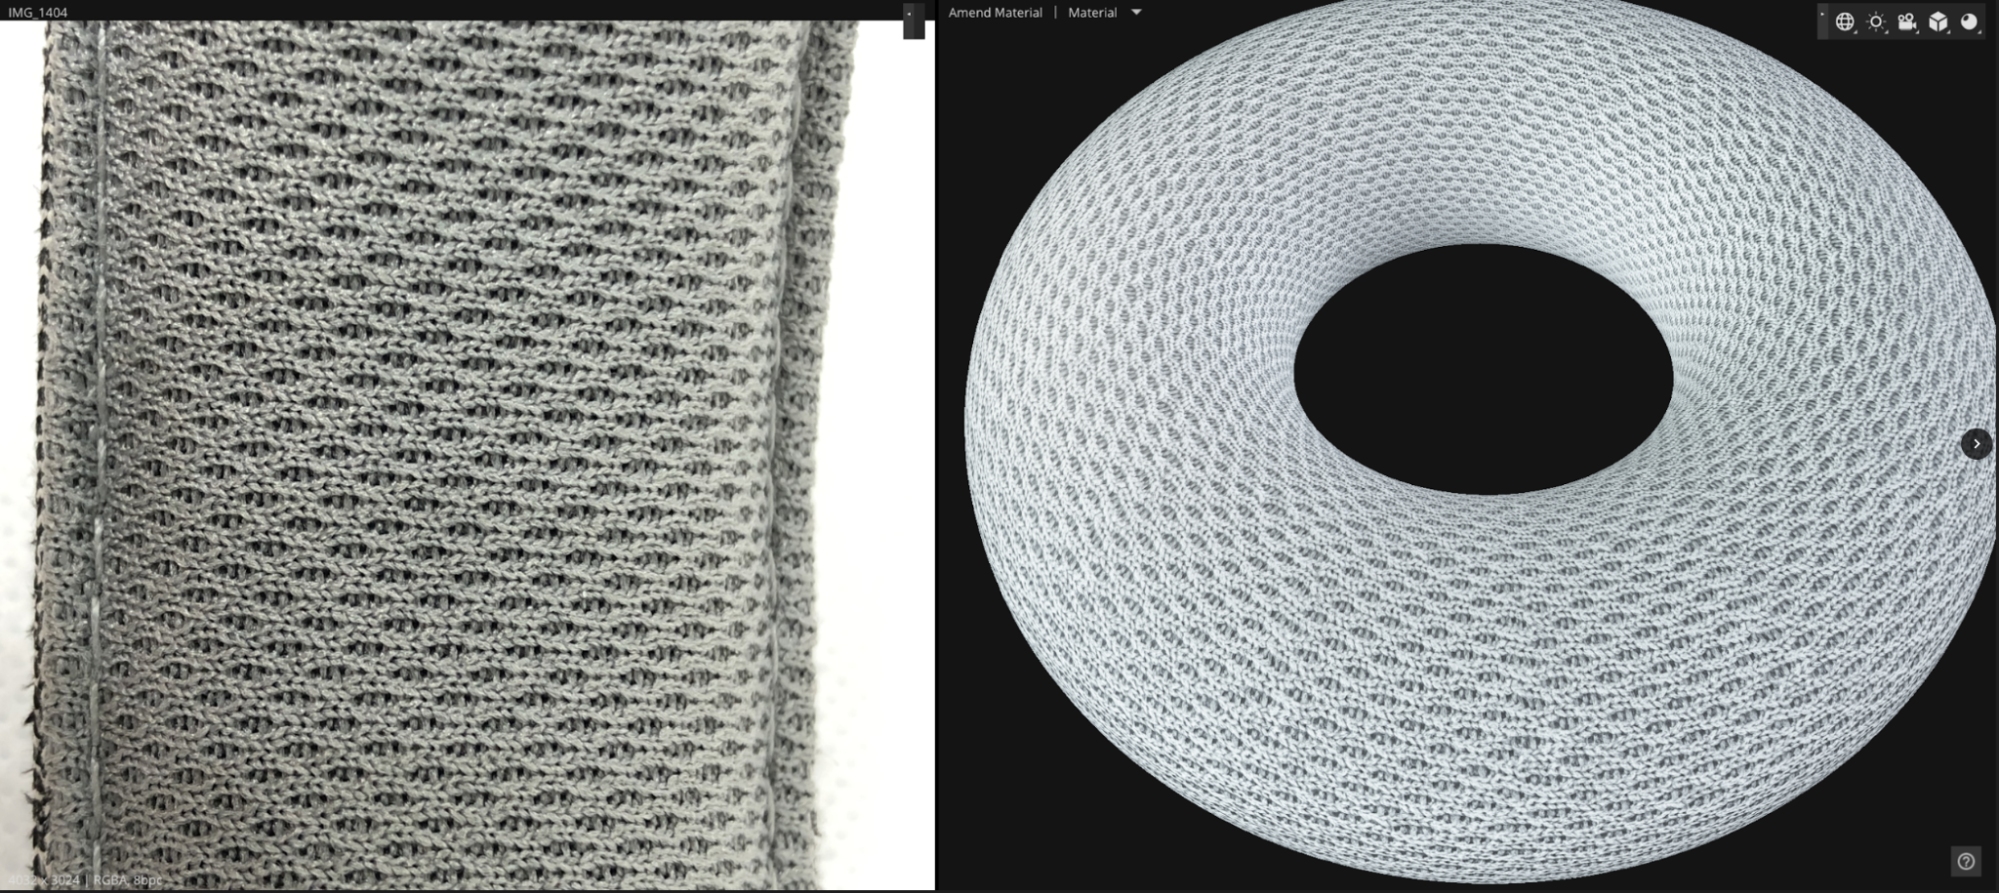 Image showing the fabric detail of the buddy headphone speakers rendered in Unity ArtEngine